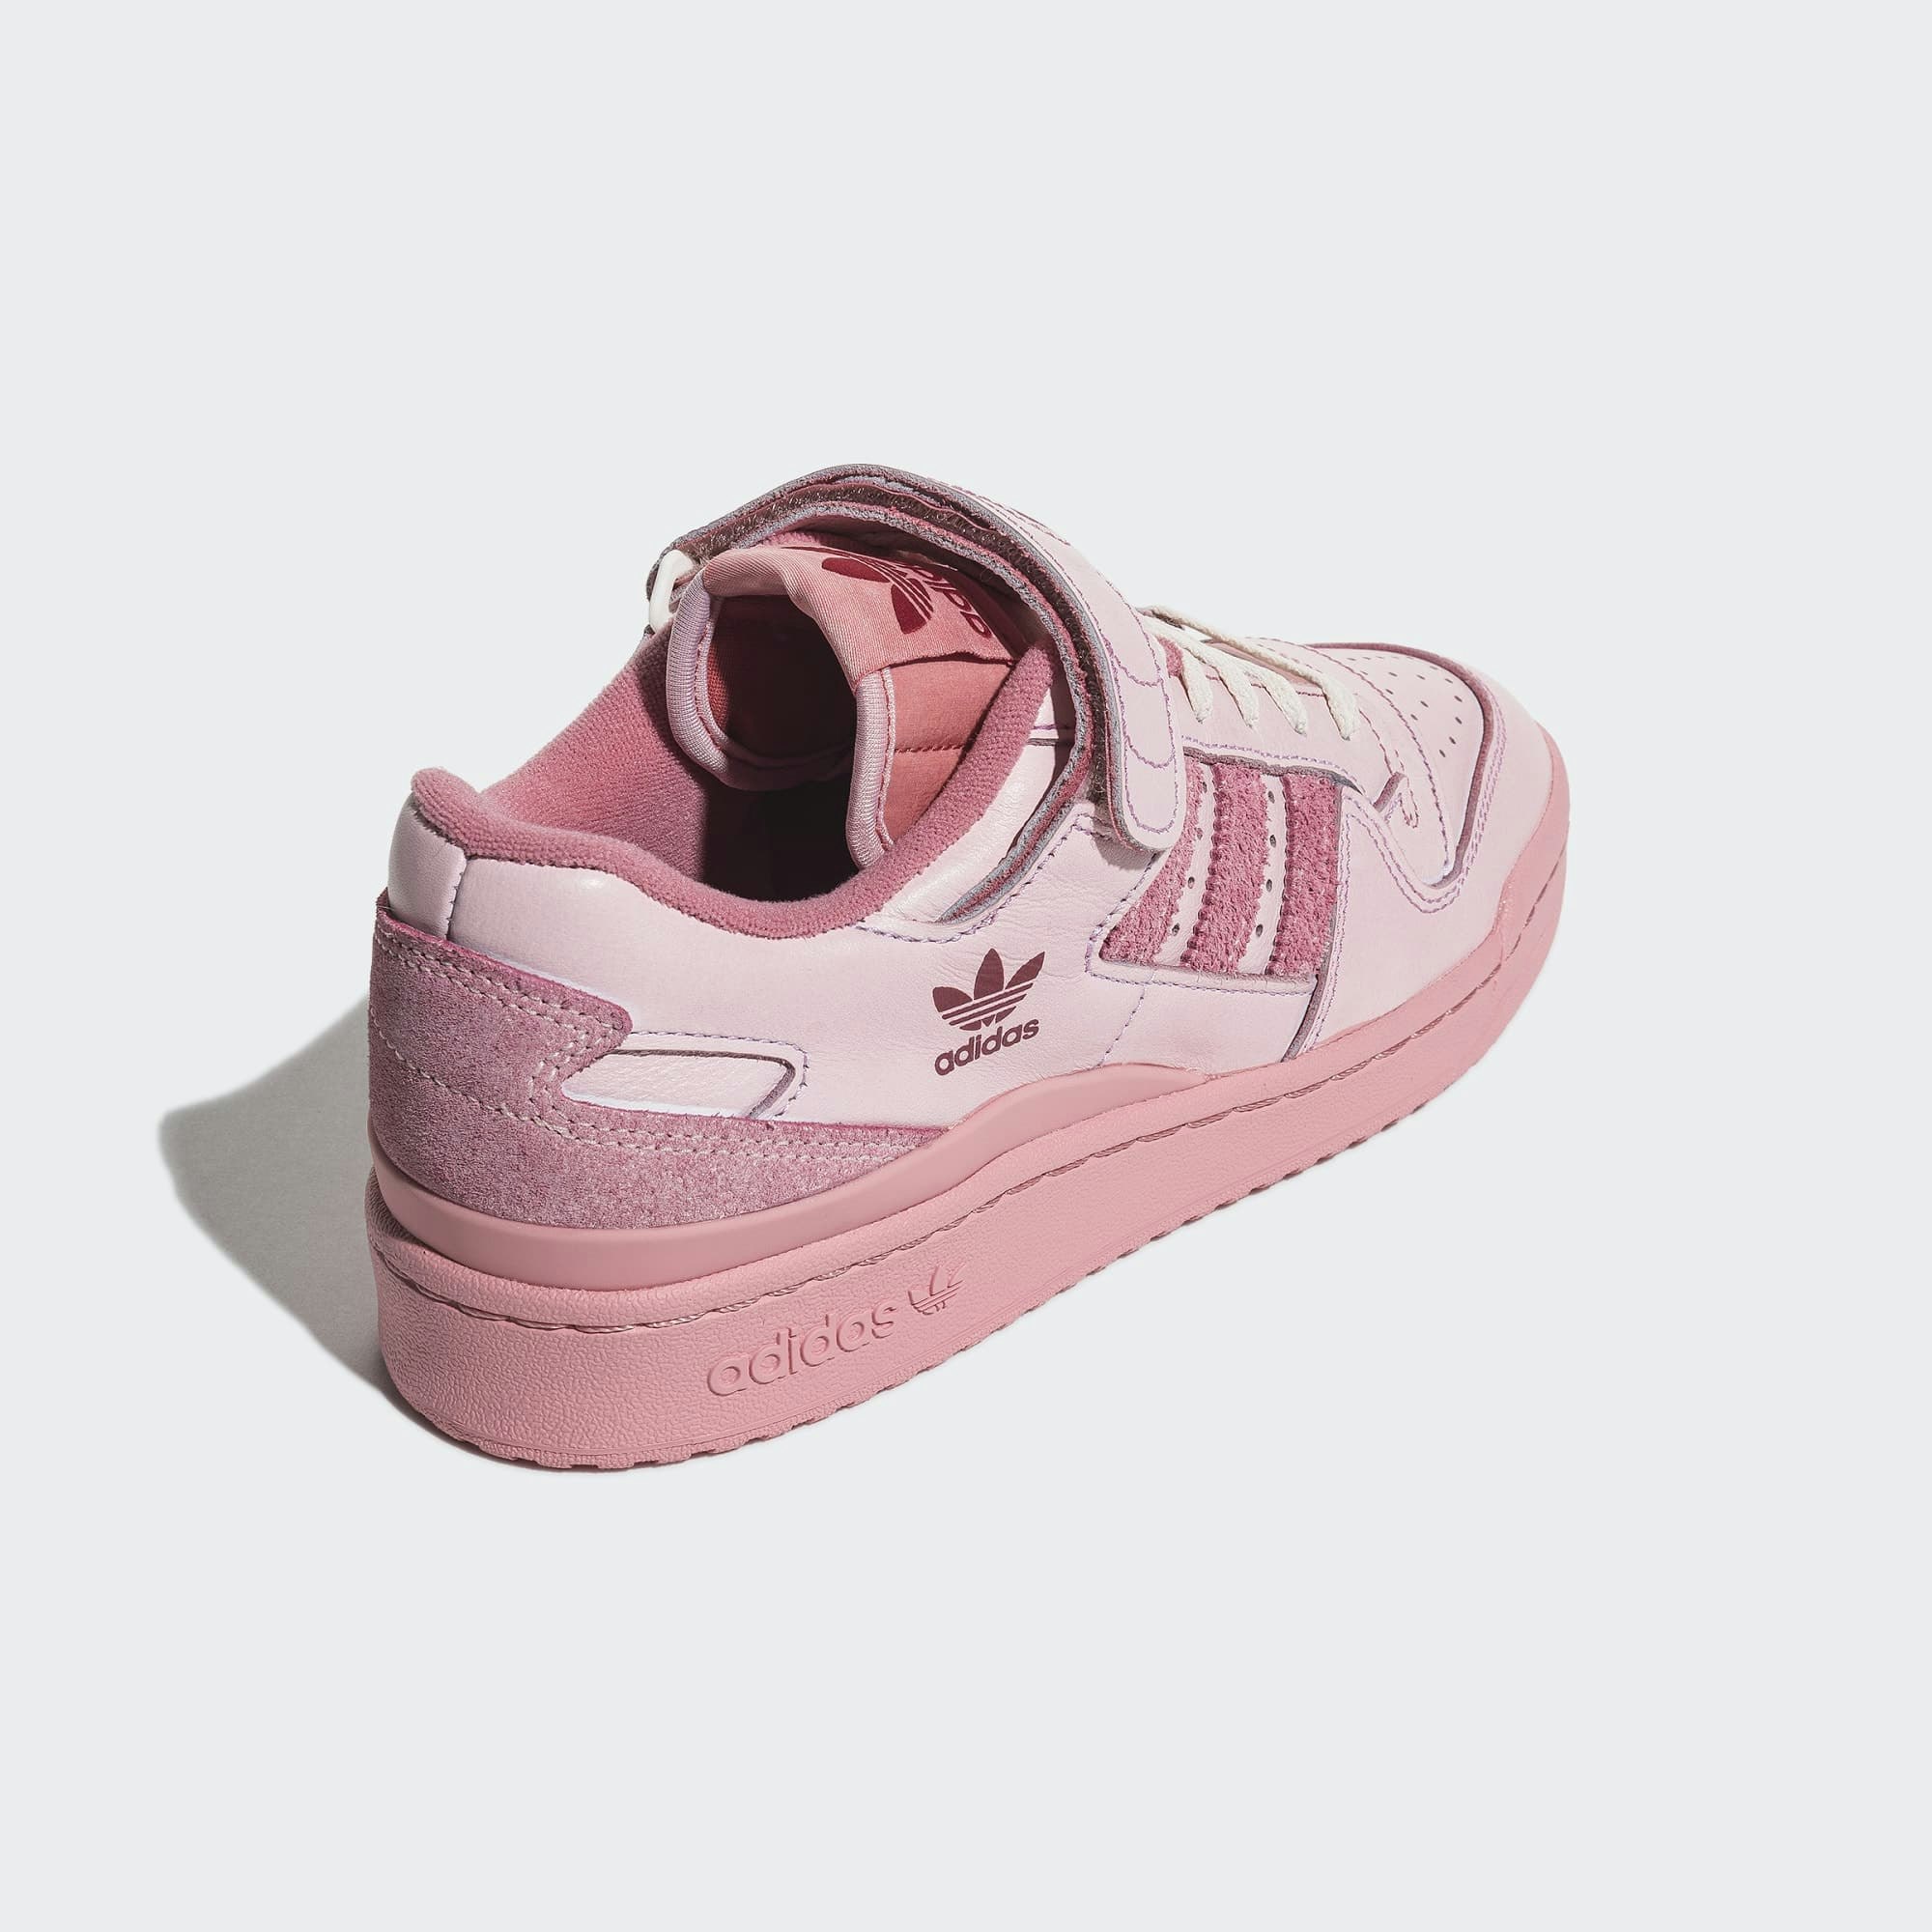 adidas Forum 84 Low "Pink at Home"